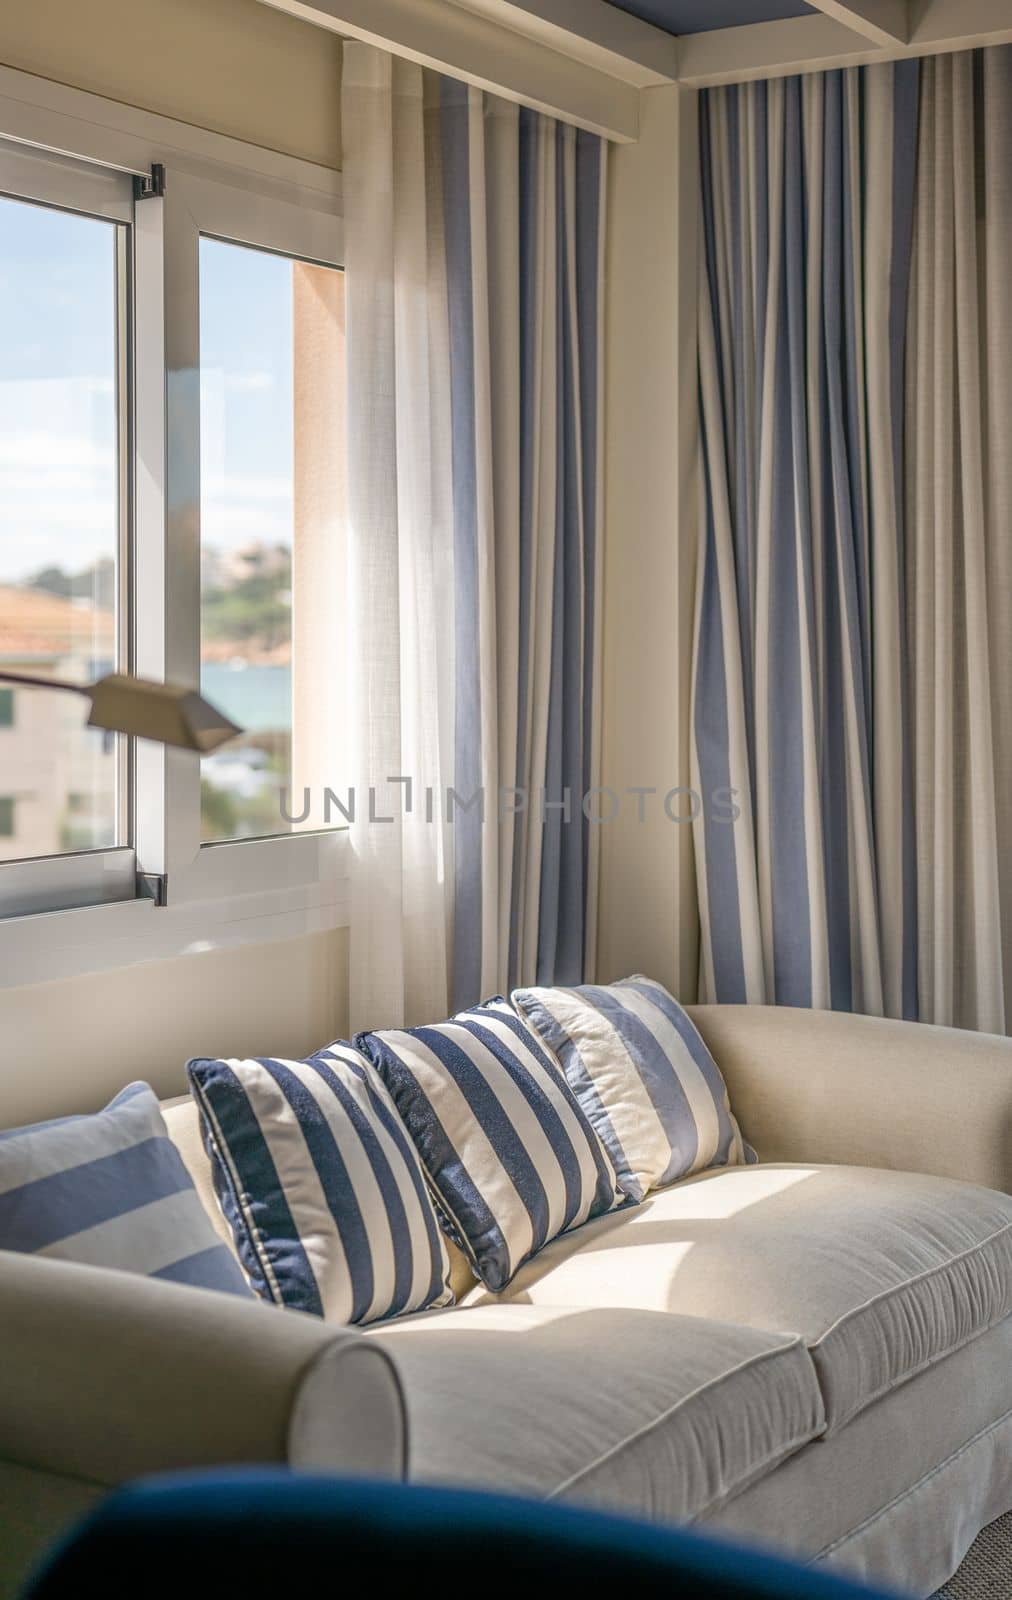 Closeup of cozy upholstered sofa in beige color with decorative pillows in vertical blue-beige stripes and curtains in same style. Cozy living room flooded with bright sunlight from window. by apavlin